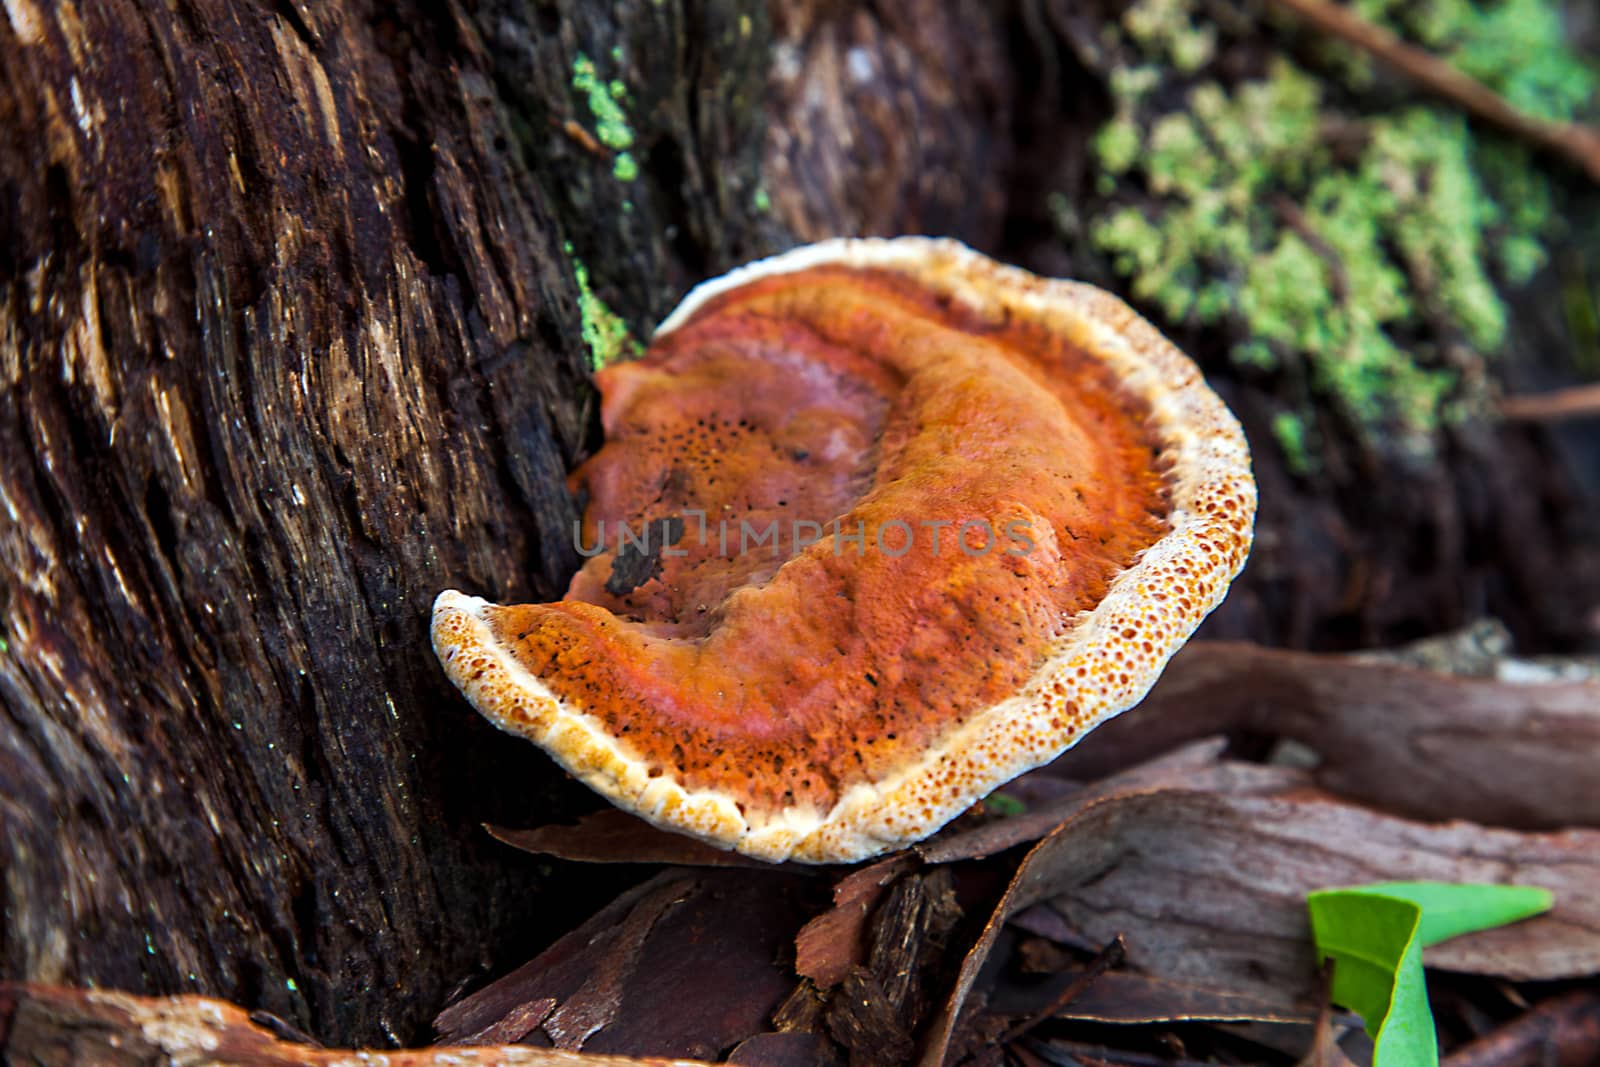 Mushroom in New South Wales Australia Schillerporling by Makeral